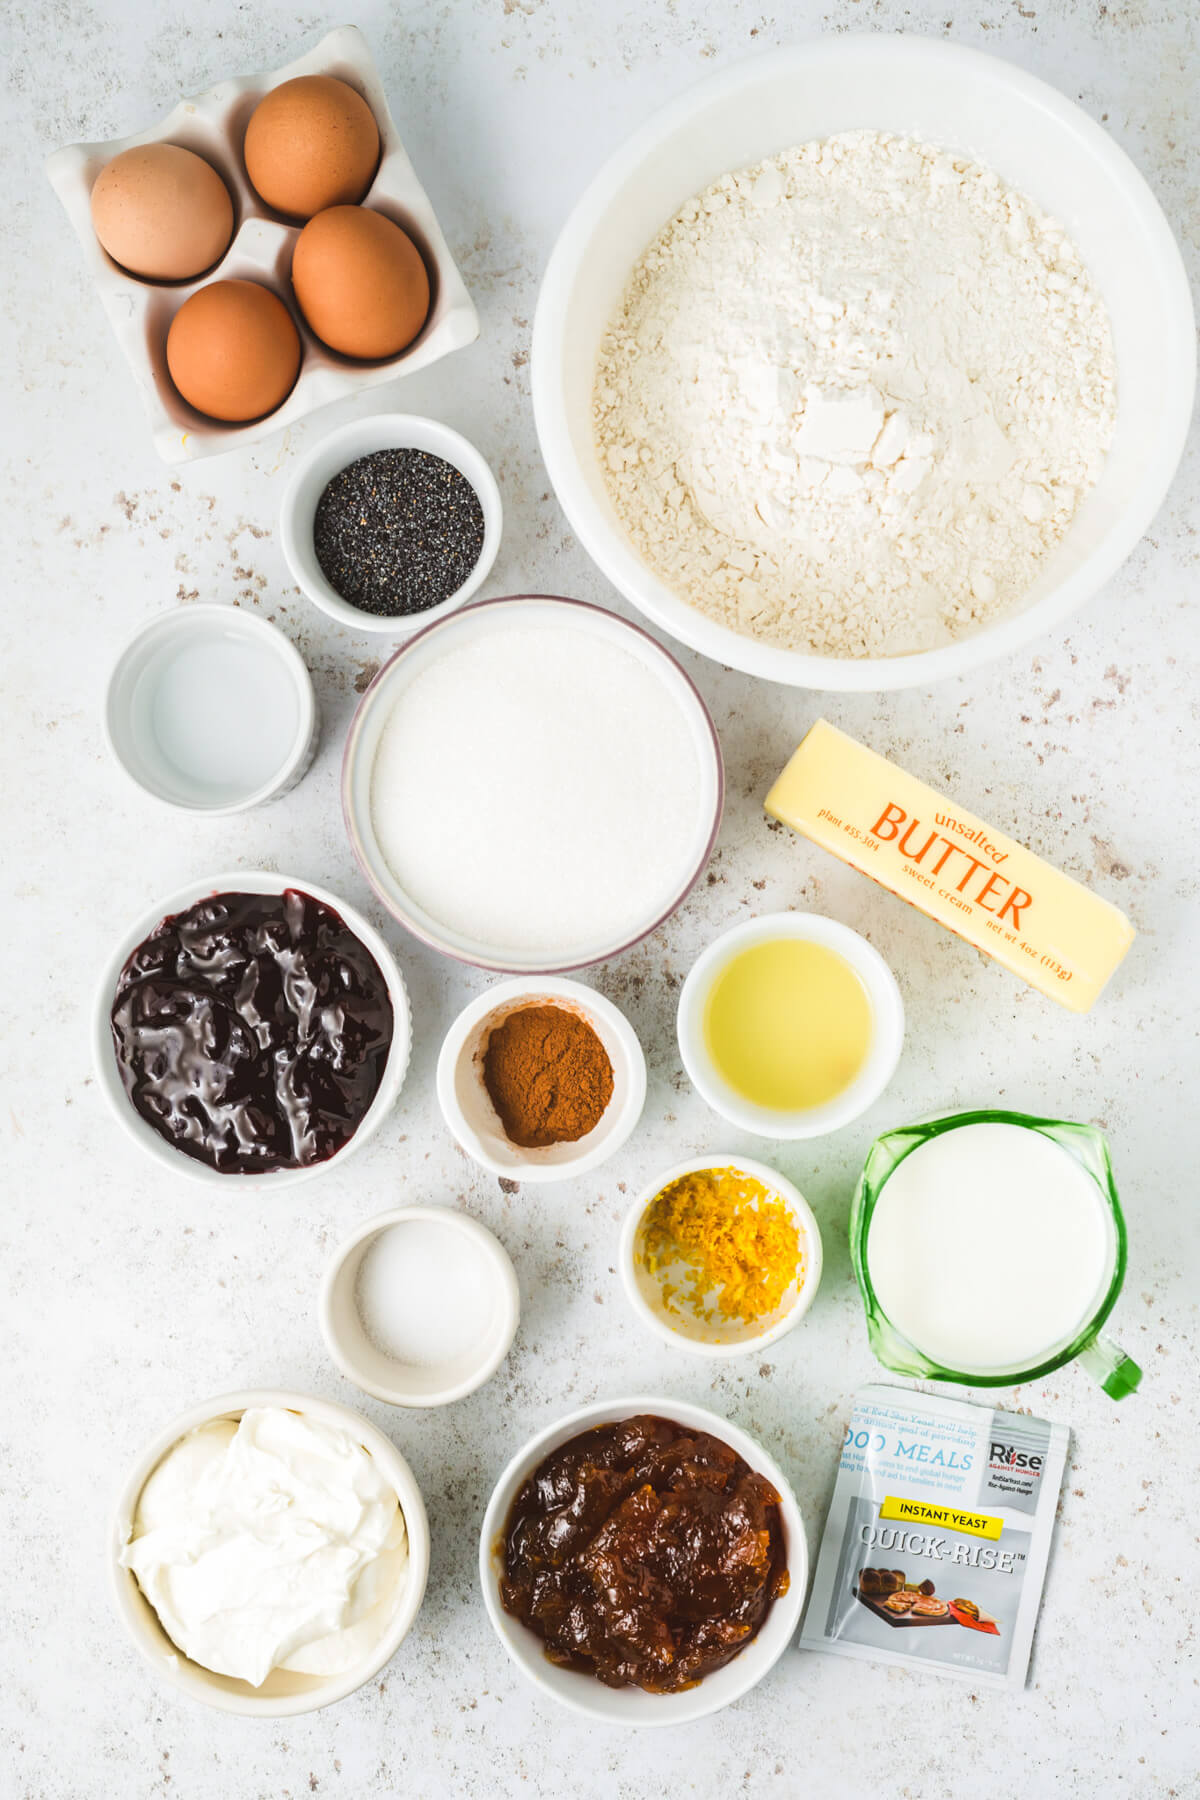 Ingredients required to make homemade kolaches and a variety of fillings.